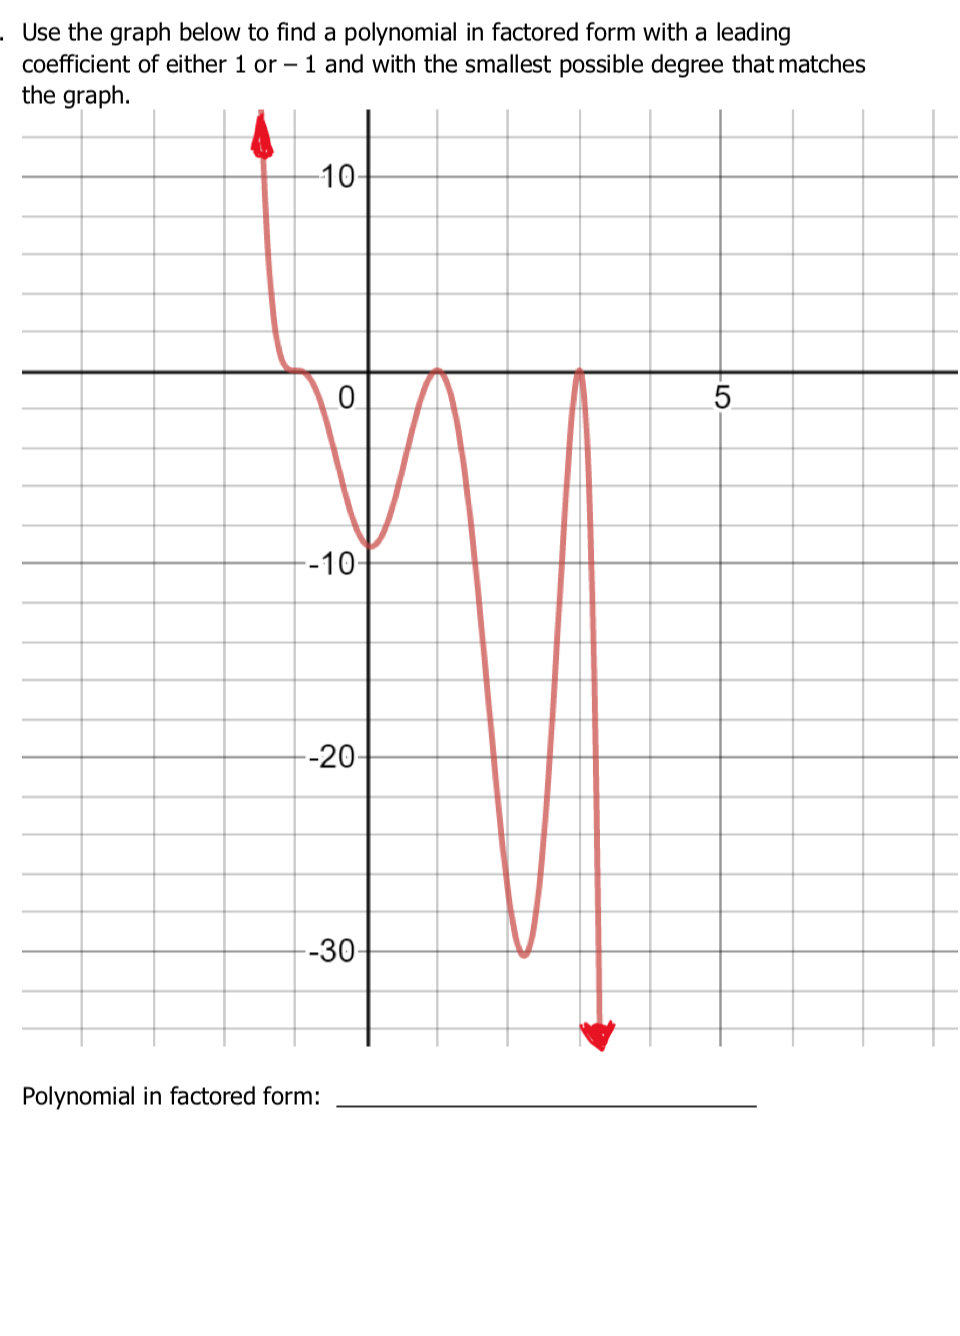 .Use the graph below to find a polynomial in factored form with a leading
coefficient of either 1 or – 1 and with the smallest possible degree that matches
the graph.
-10-
5.
--10-
--20-
-30-
Polynomial in factored form:
